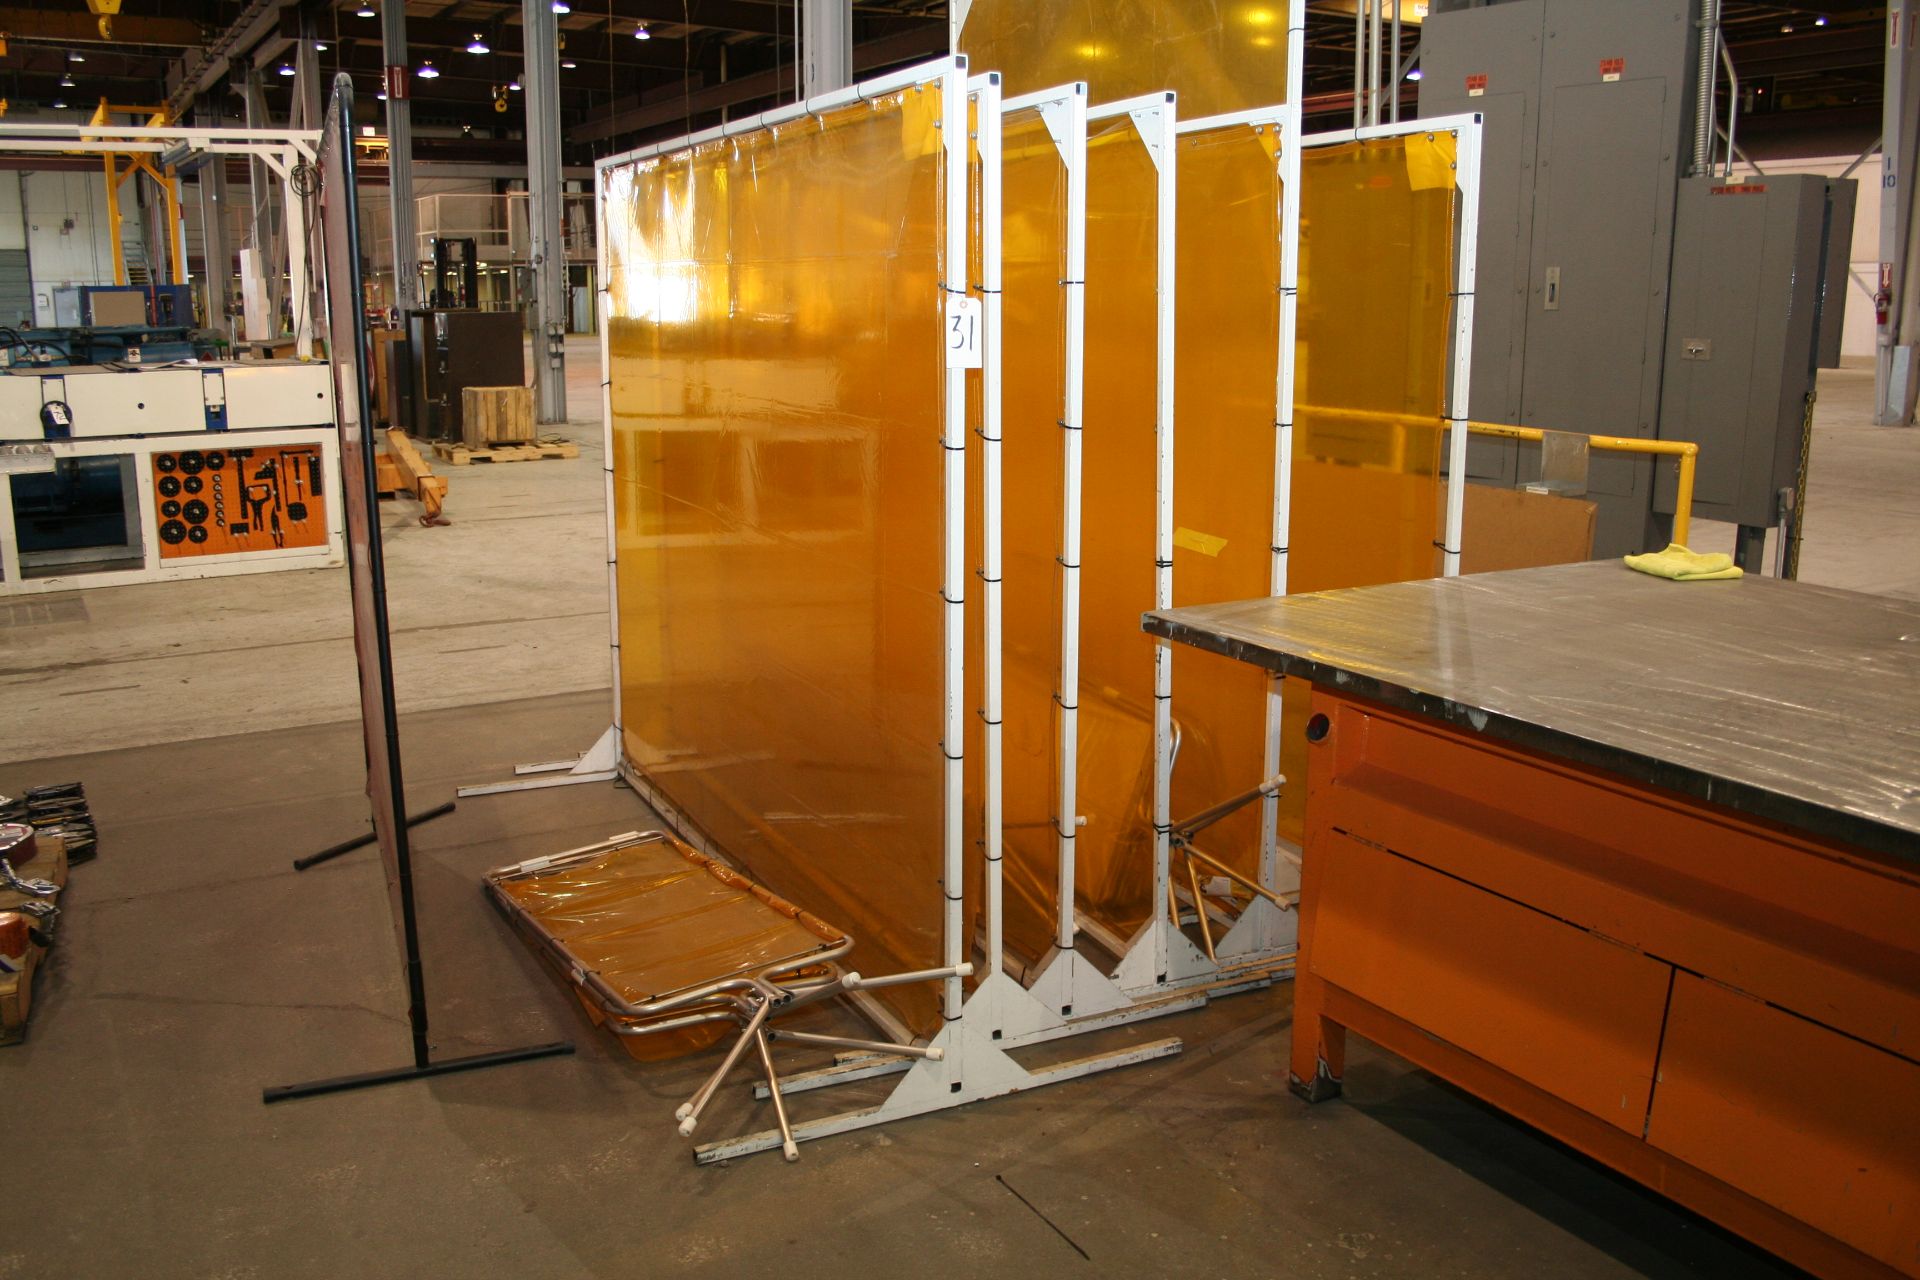 (8) Large welding Screens, (8) Small Screens